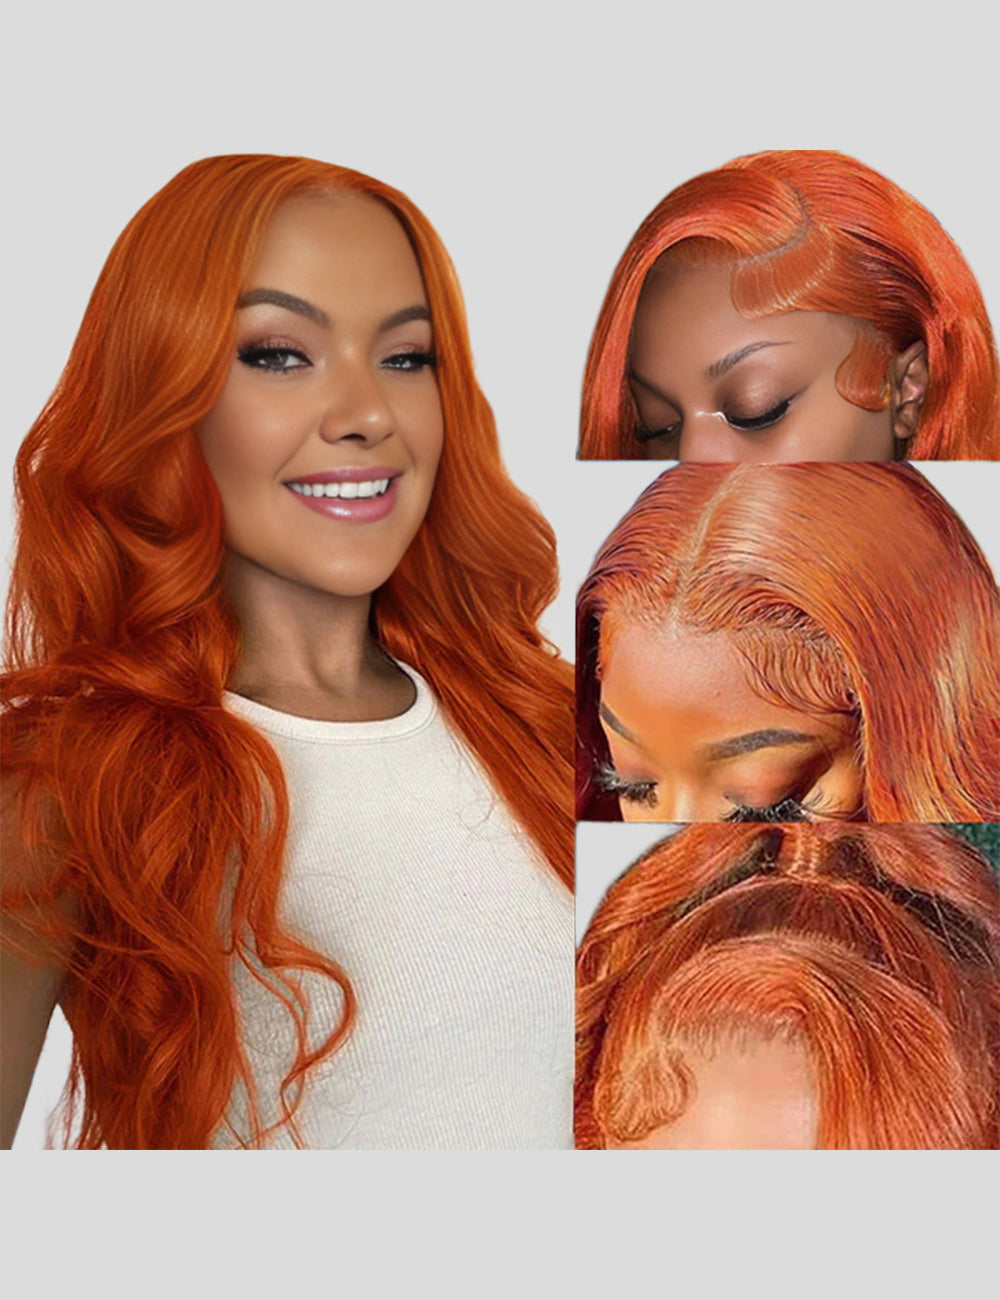 Ginger Color Wigs Body Wave Lace Frontal Wigs 250% Density Human Hair Wigs